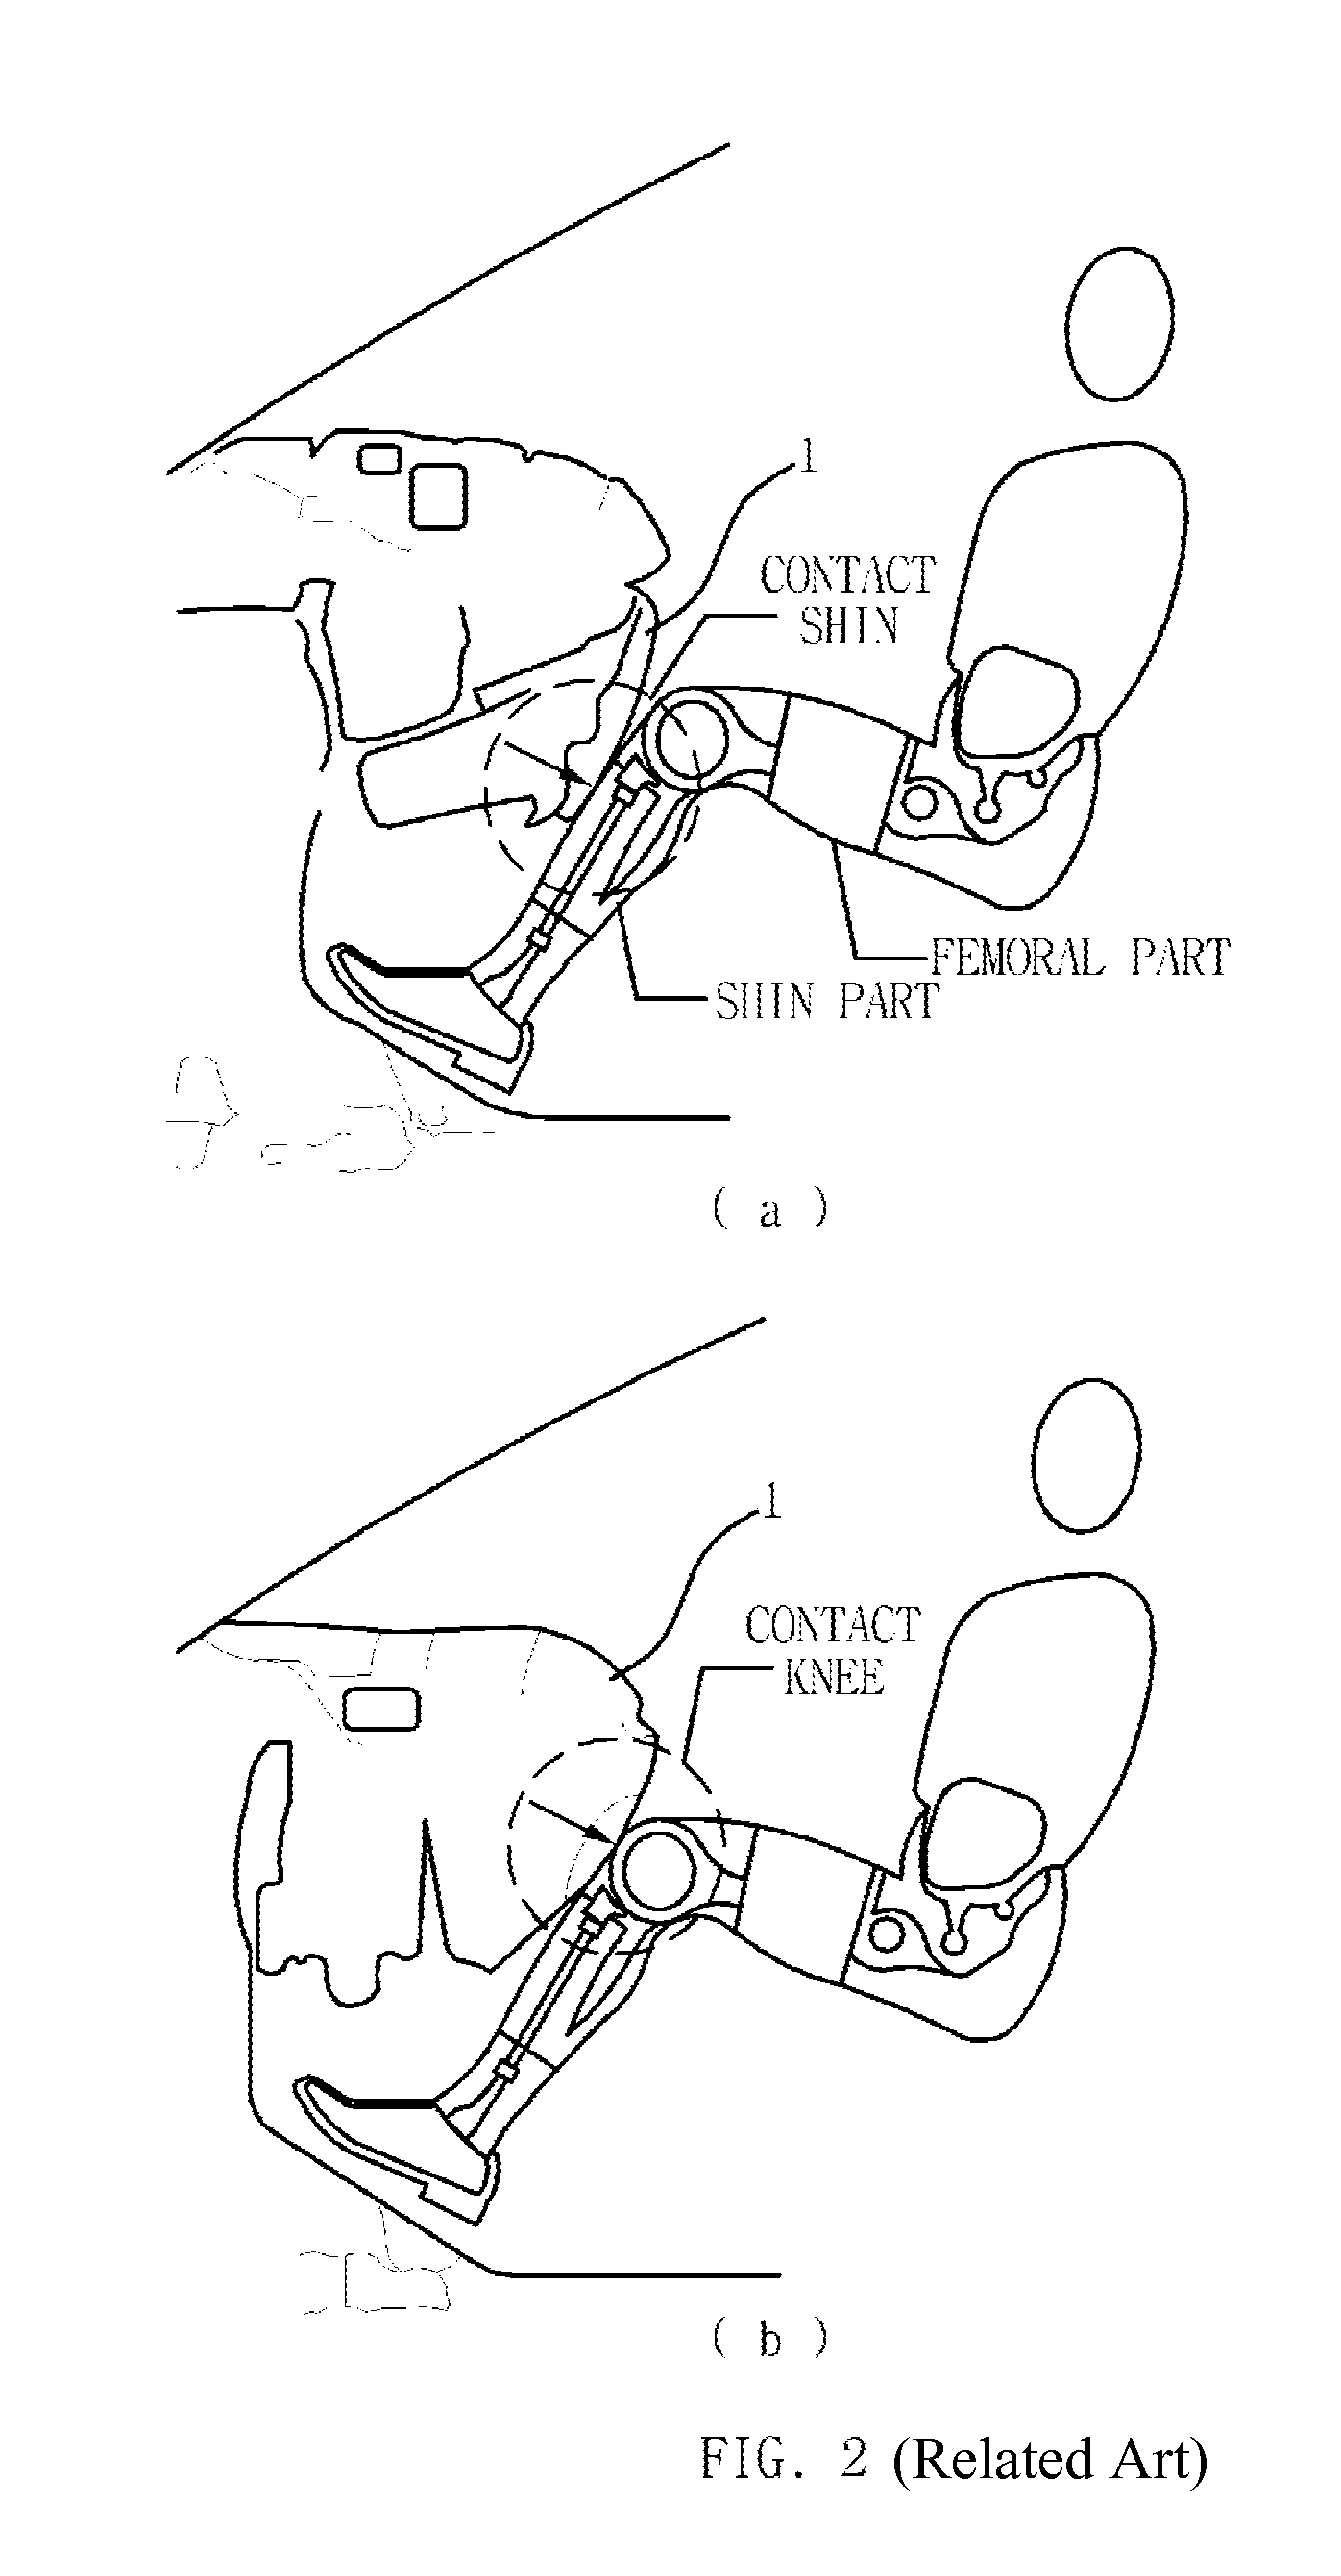 Structure for reducing knee injury in vehicle